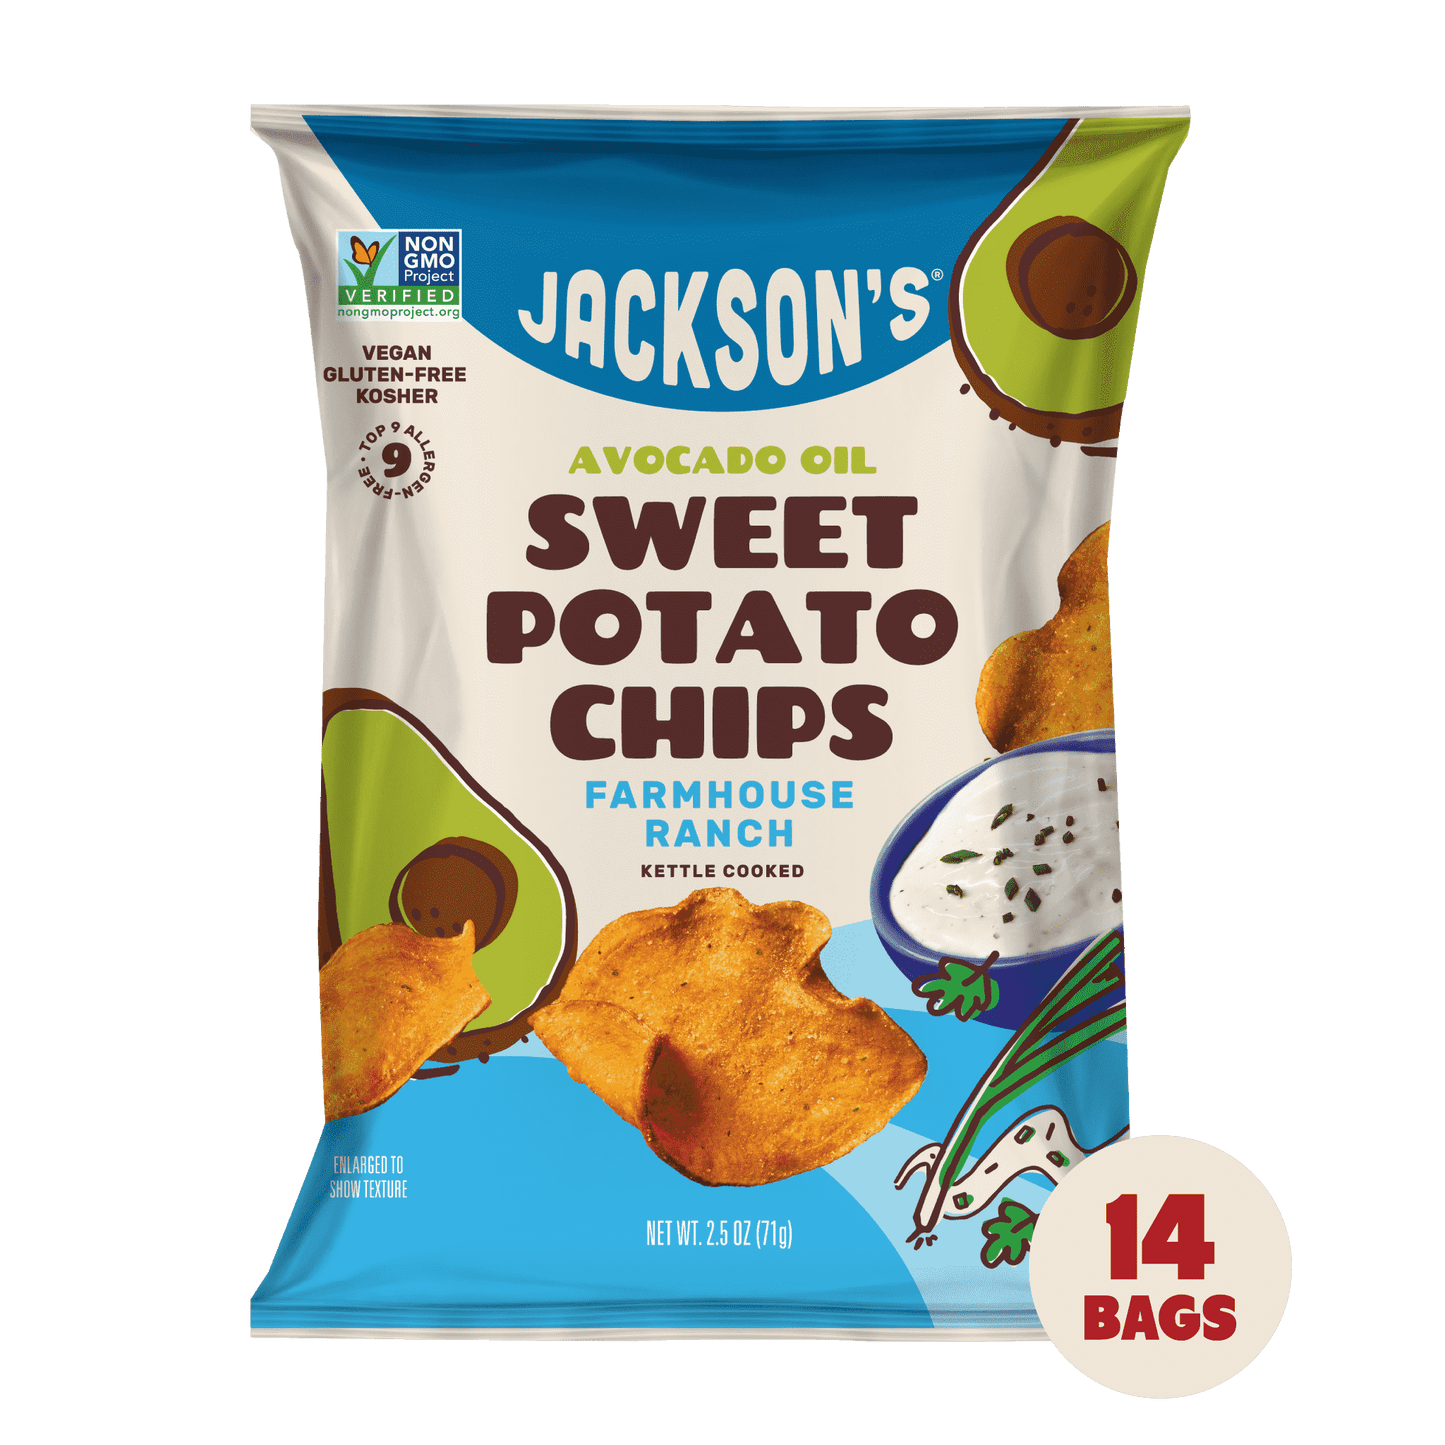 Farmhouse Ranch Sweet Potato Chips with Avocado Oil - Snack Size - by Jackson's